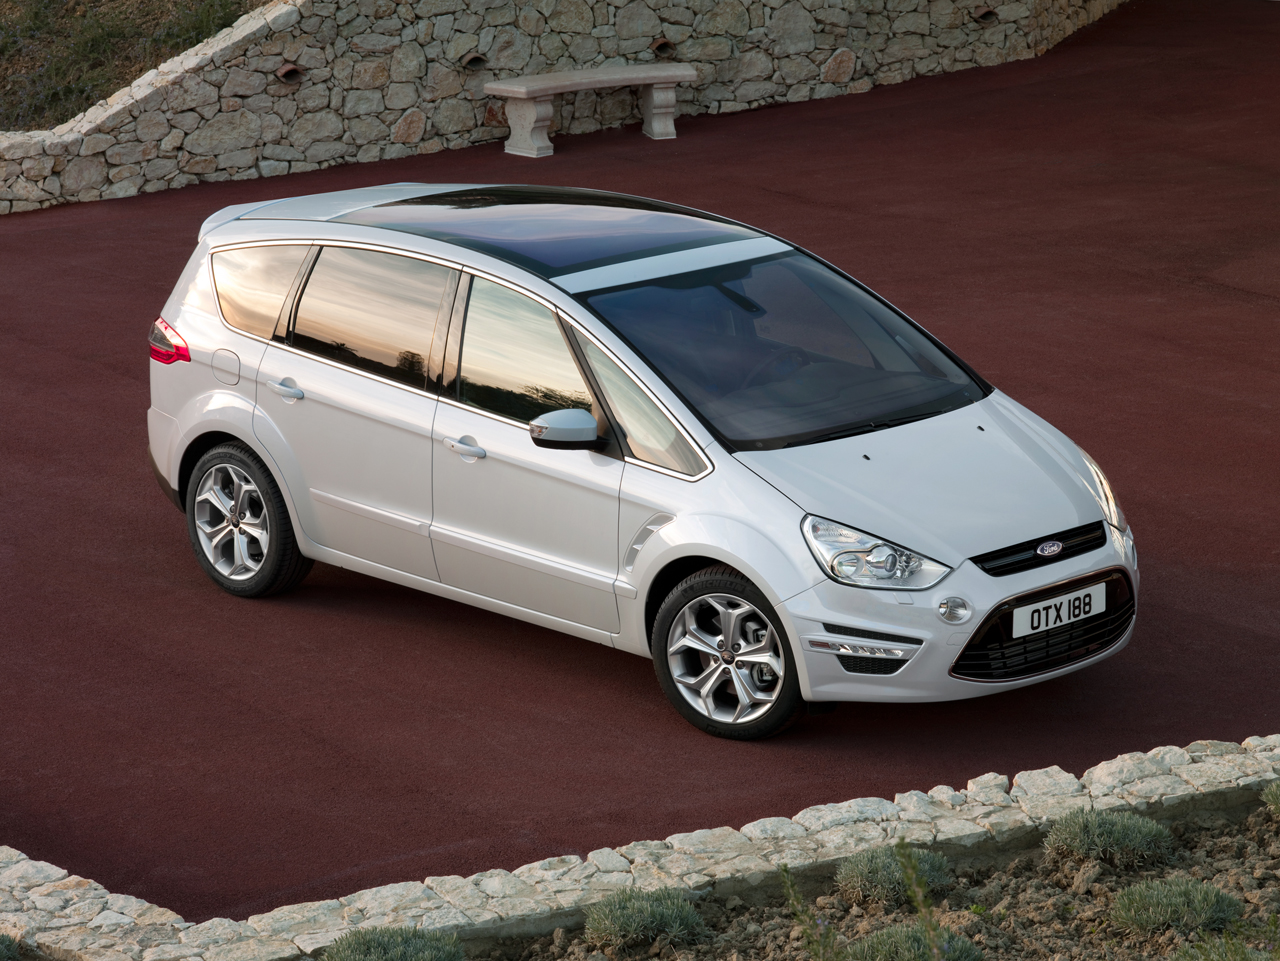 2011 Ford SMAX, Galaxy Updated Photo Gallery autoevolution